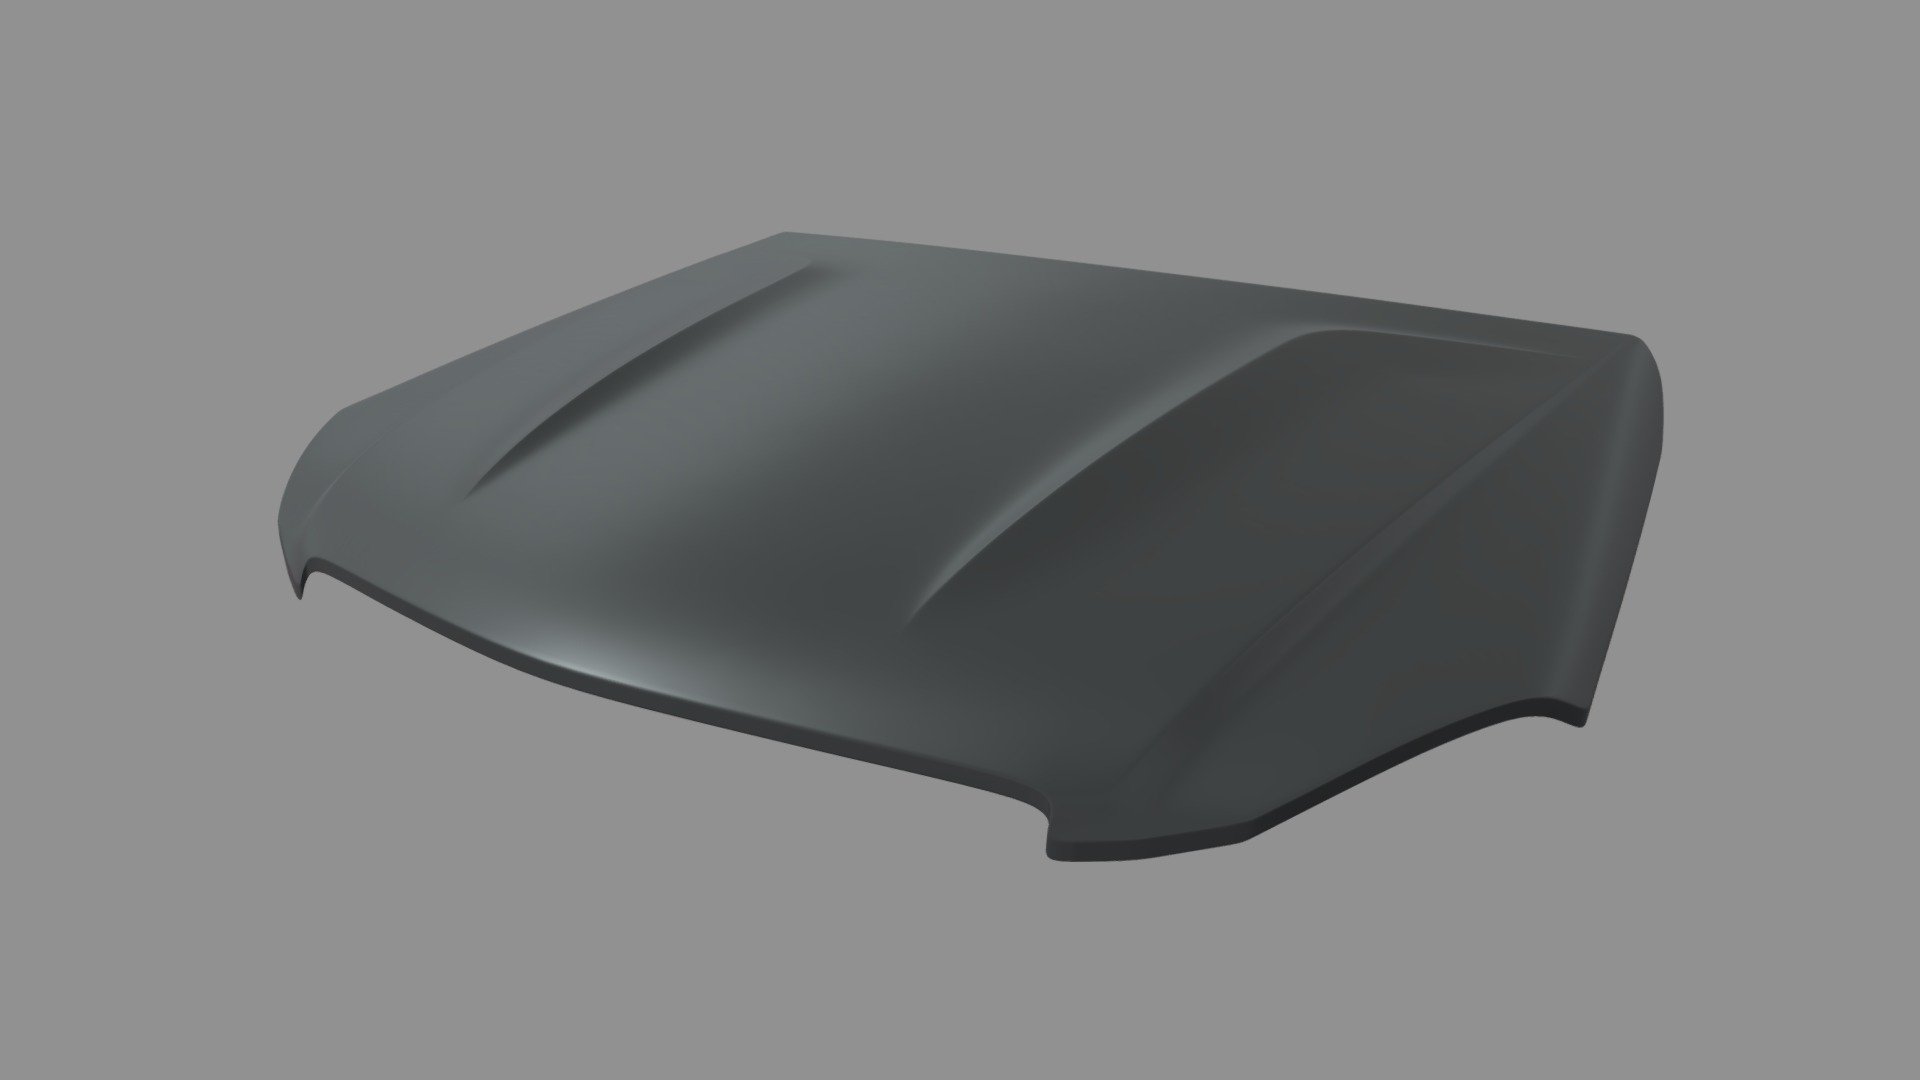 This model contains a Car Bonnet 06 based on a real stylized car bonnet from a sport car which i modeled in Maya 2018. This model is perfect to create a new great scene with different car pieces or part of a car model. I got a lot of different Car Seats, Car Spoiler and Car Parts on my profile.

The model is ready as one unique part and ready for being a great CGI model and also a 3D printable model, i will add the STL model, tested for 3D printing in Ultimaker Cura. I uploaded the model in .mb, ,blend, .stl, .obj and .fbx. If you need any other file tell me.

If you need any kind of help contact me, i will help you with everything i can. If you like the model please give me some feedback, I would appreciate it.

Don’t doubt on contacting me, i would be very happy to help. If you experience any kind of difficulties, be sure to contact me and i will help you. Sincerely Yours, ViperJr3D - Car Bonnet 06 - Buy Royalty Free 3D model by ViperJr3D 3d model